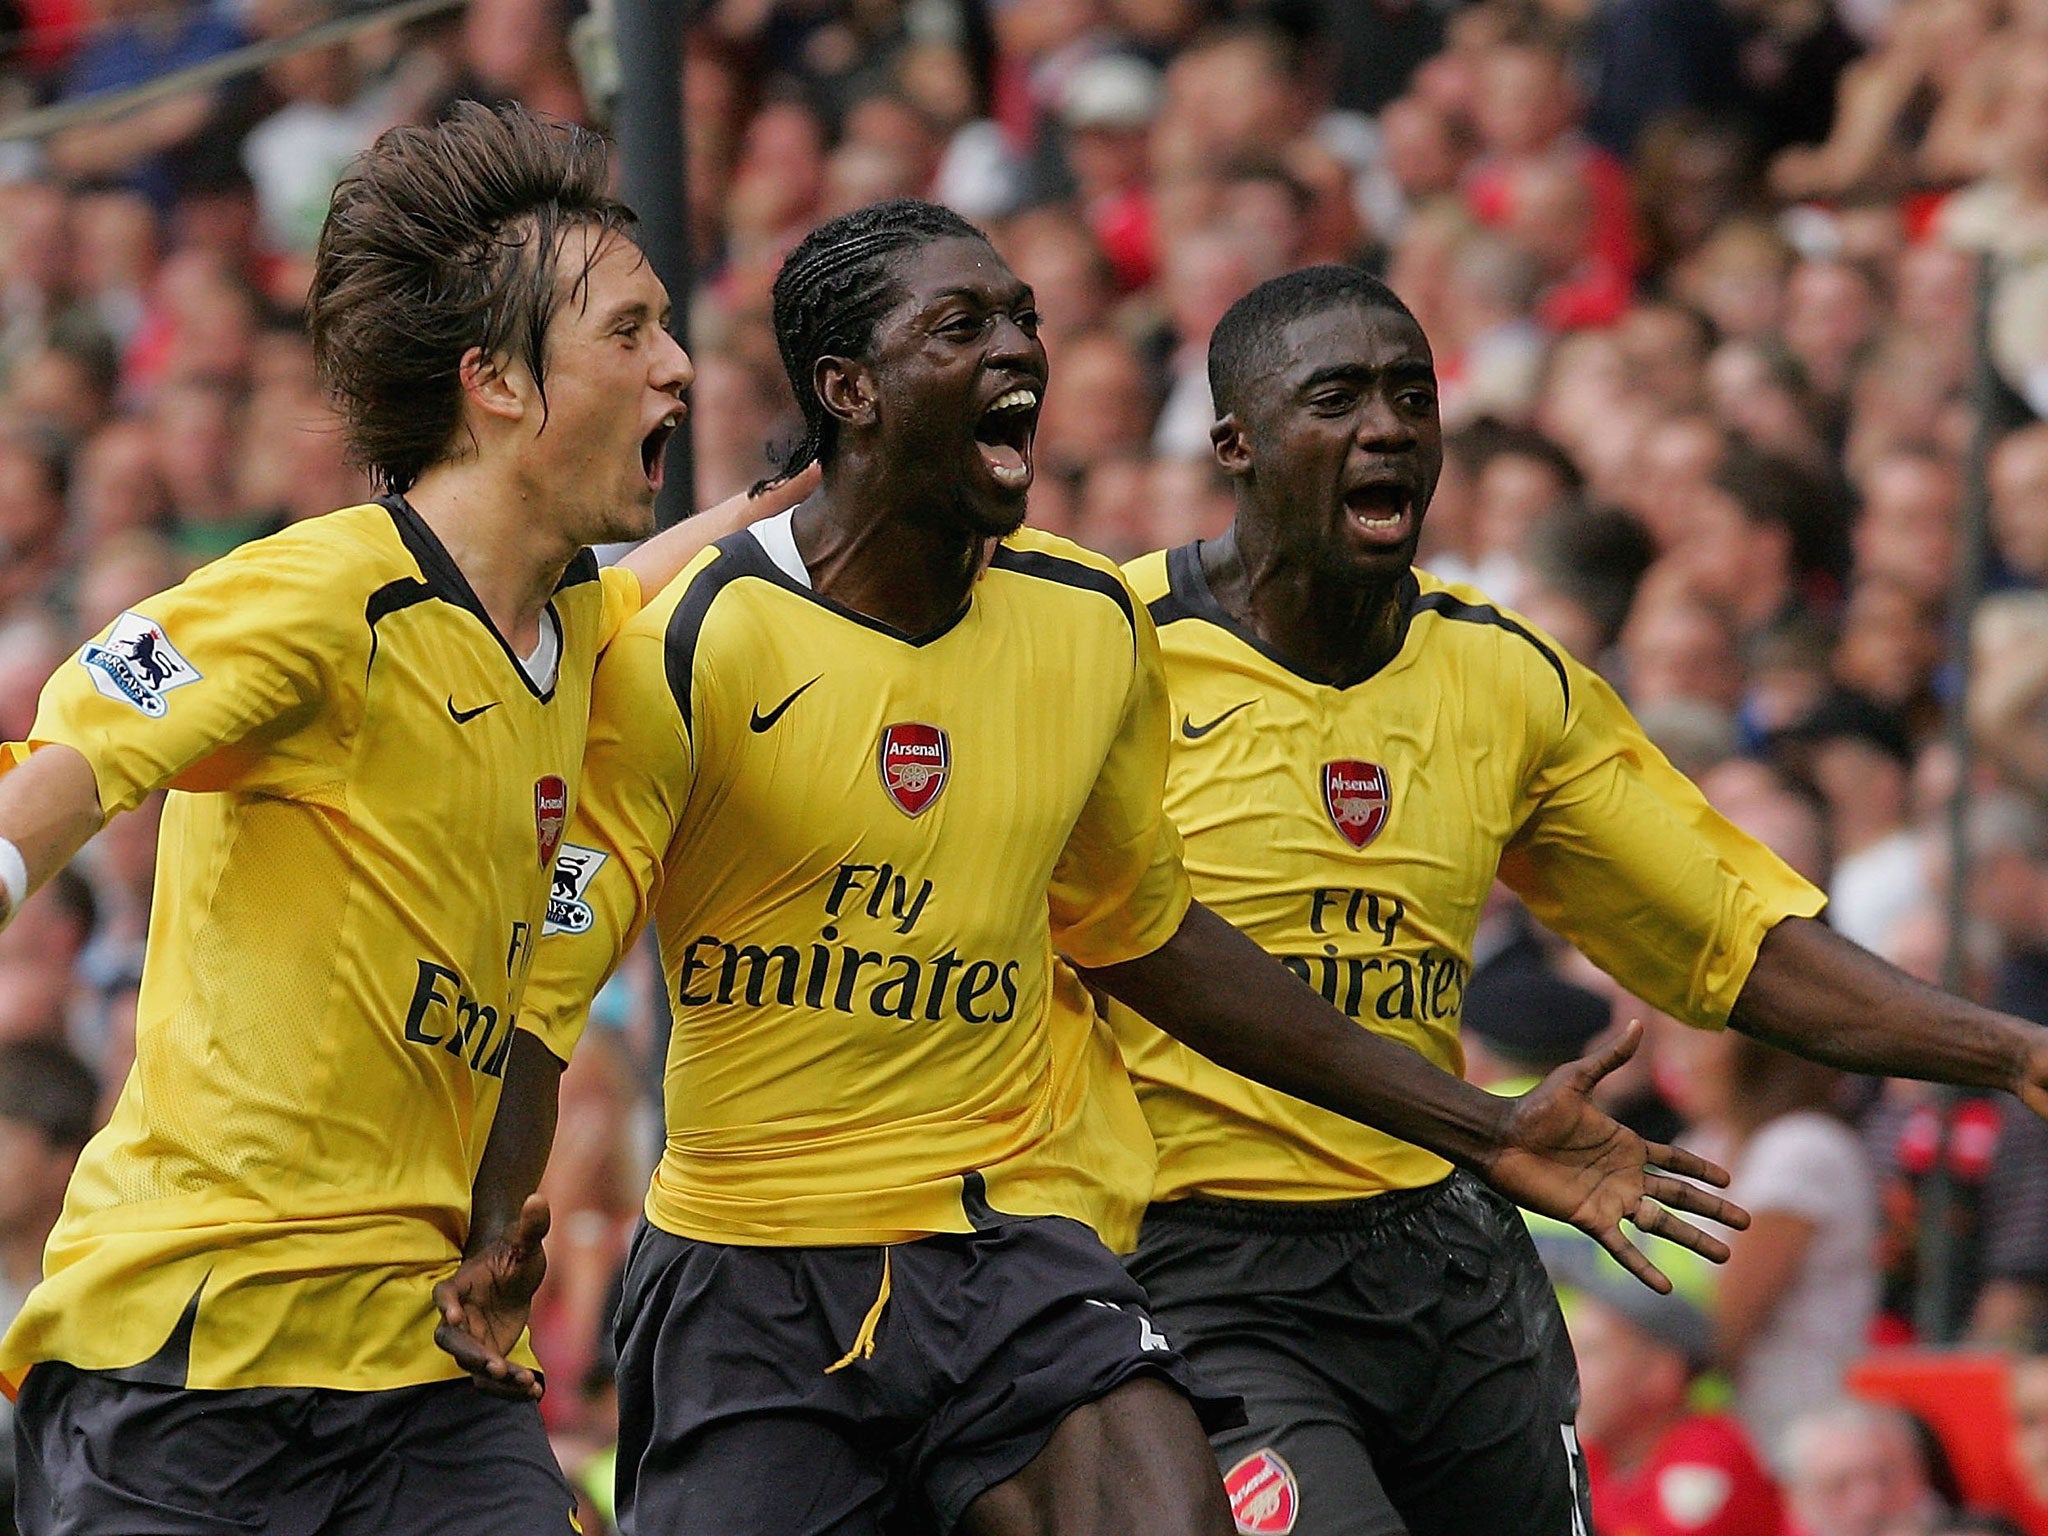 Emmanuel Adebayor celebrates his goal against Manchester United in 2006, when Arsenal last won at Old Trafford in the league